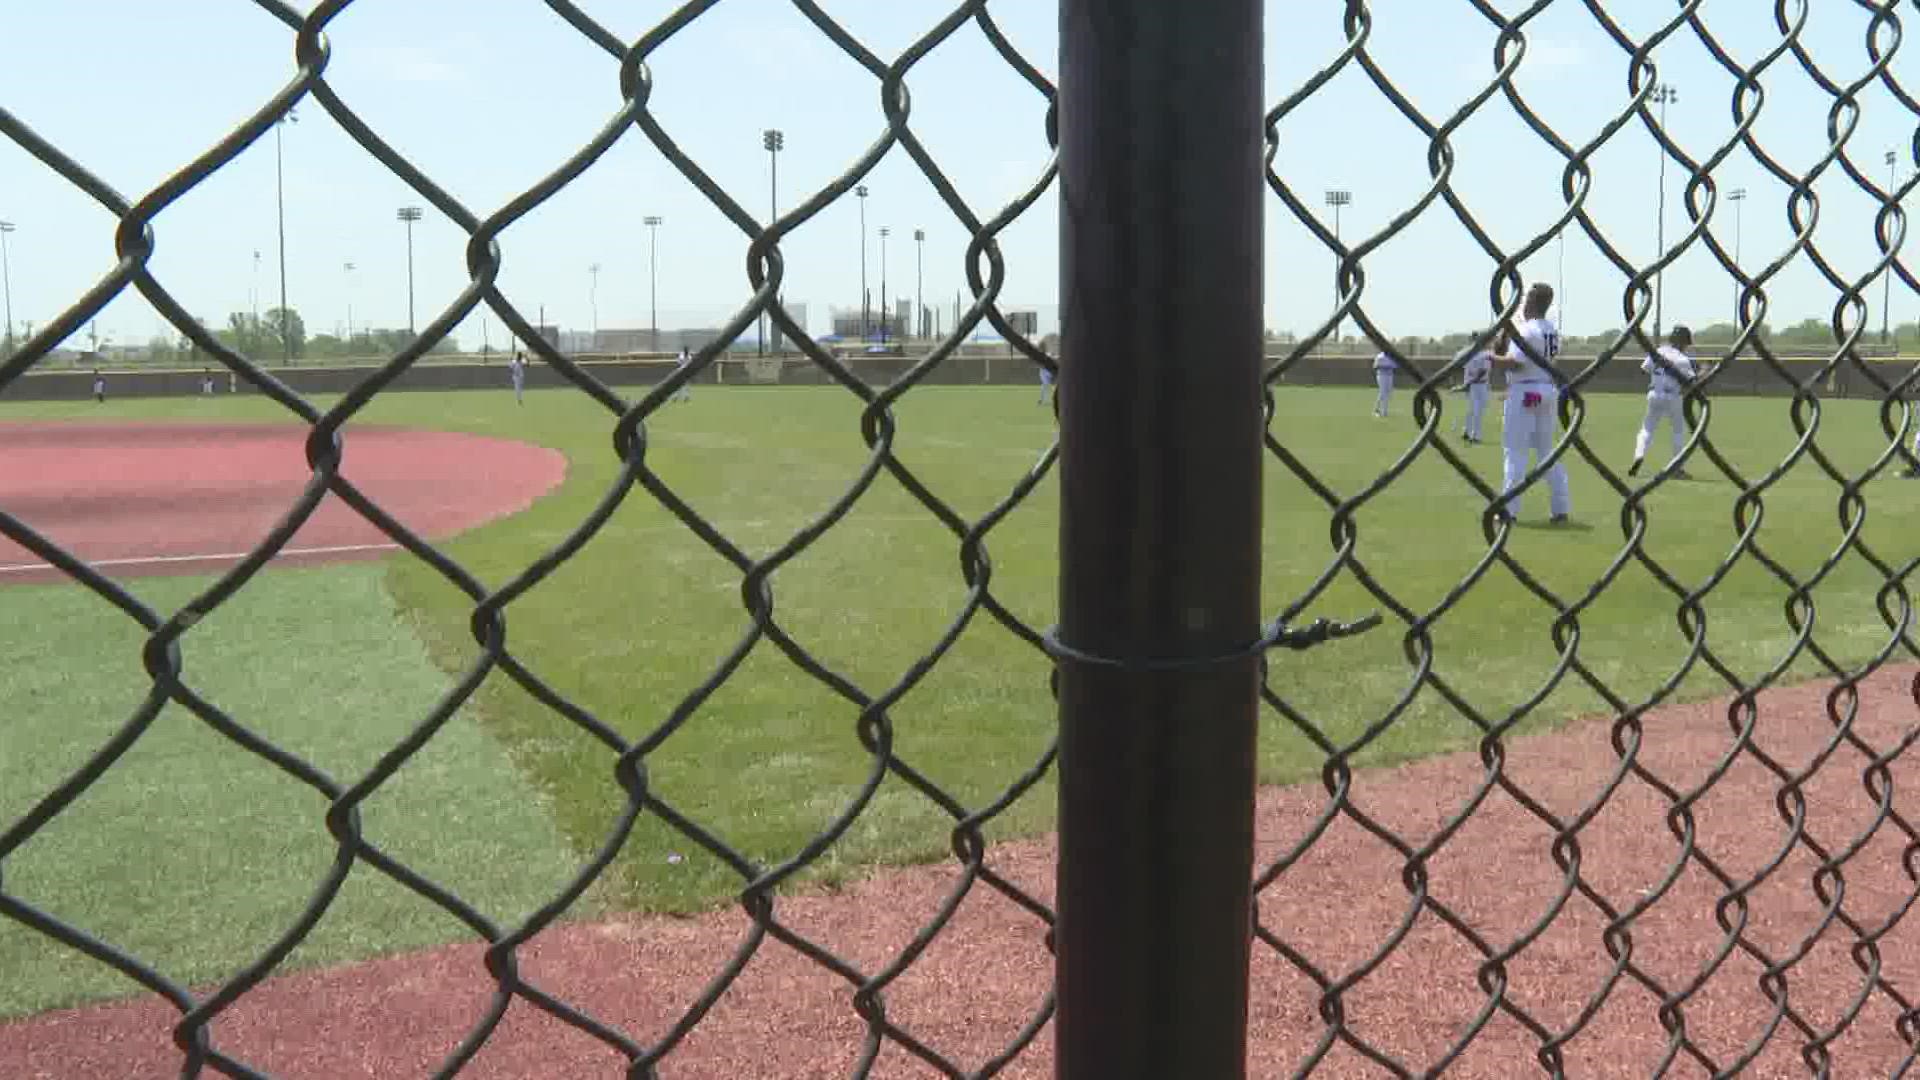 The sports complex is hosting 350 teams playing 900 games over the next few days.